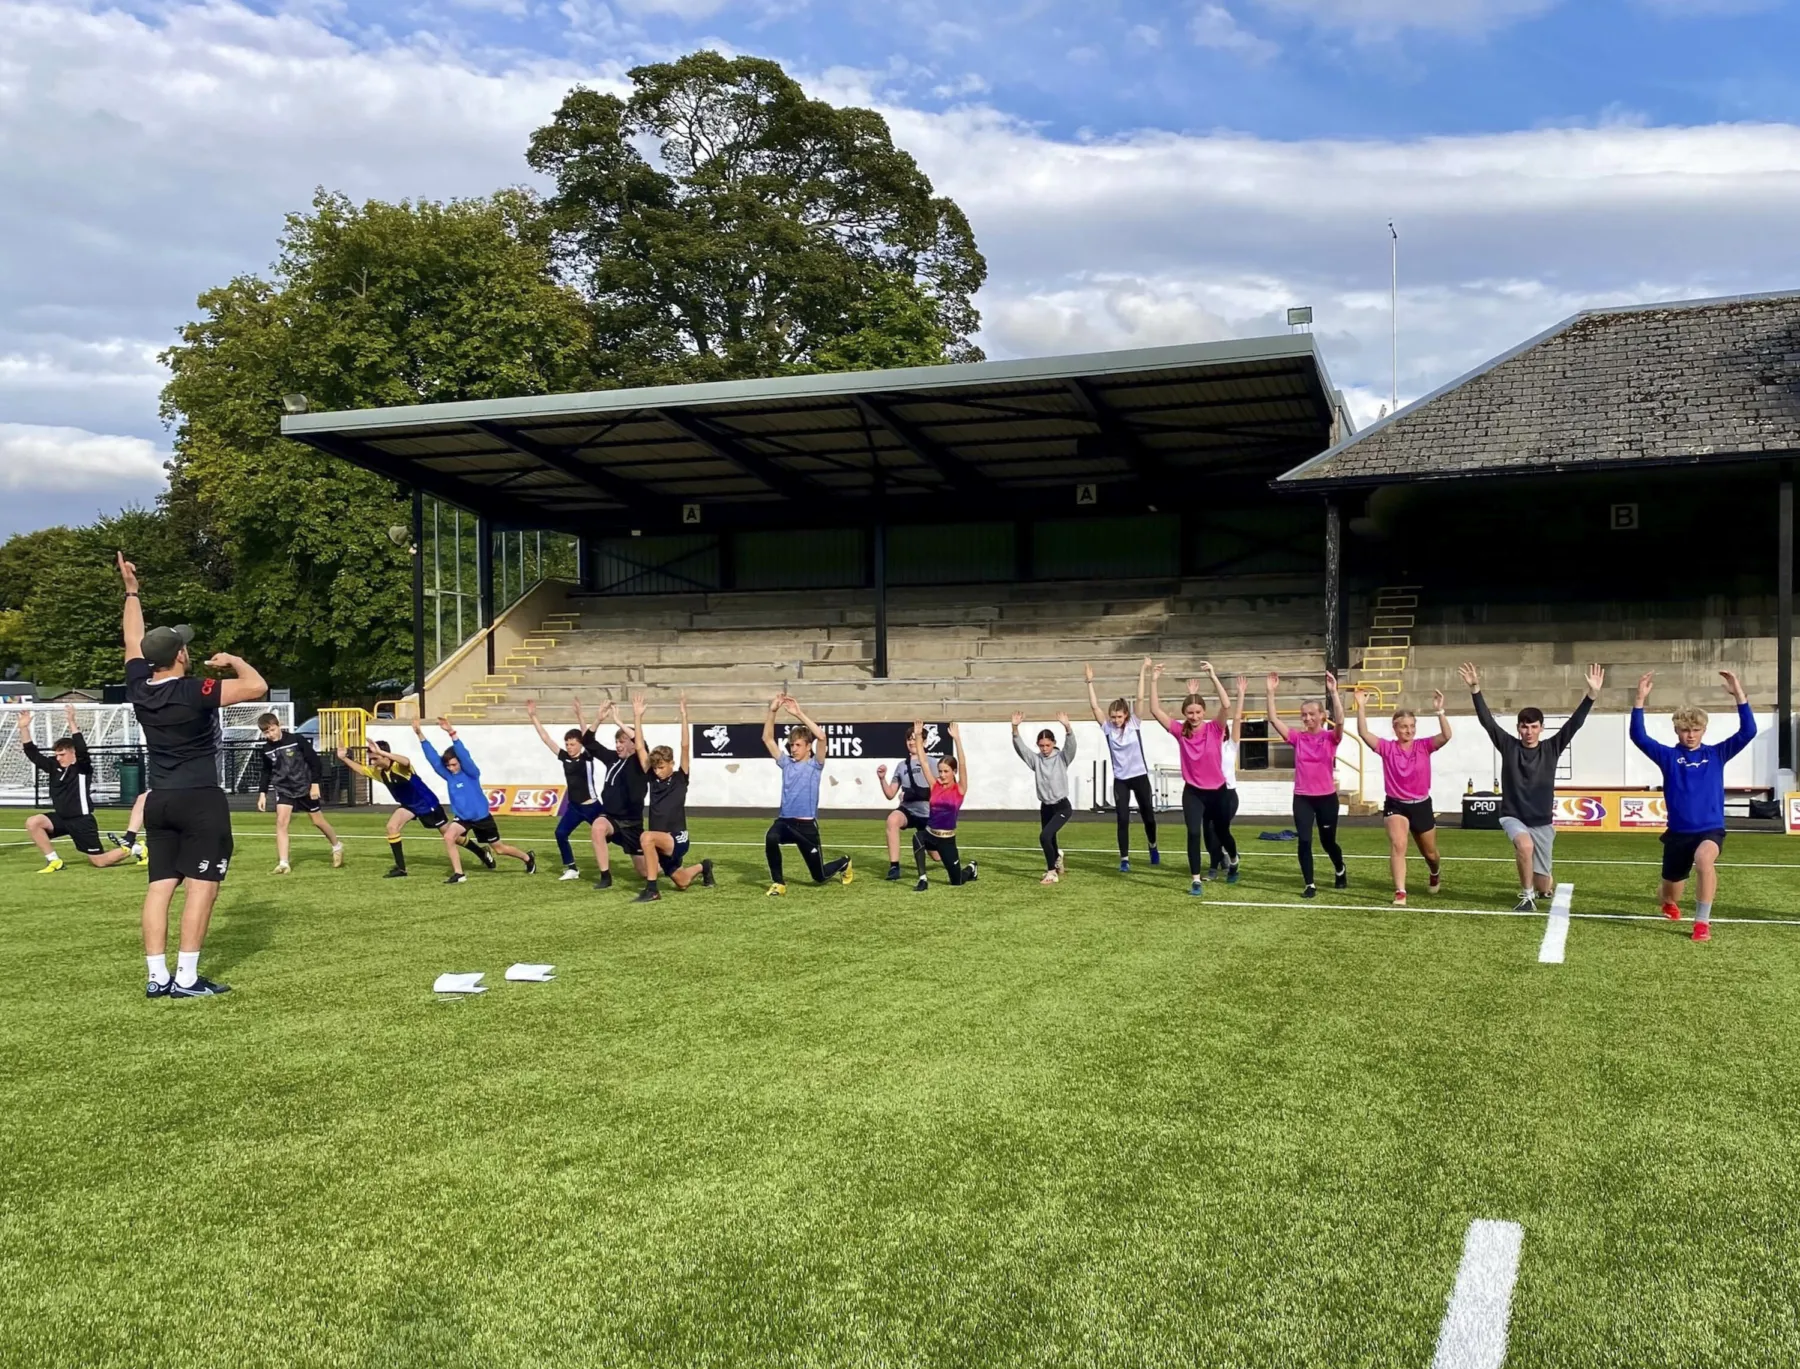 Melrose Athlete Development programme at the stadium in Melrose, Scottish Borders. A group of young people is led in a warm up by an instructor. It is a bright day in summer and trees are shown behind the stadium.